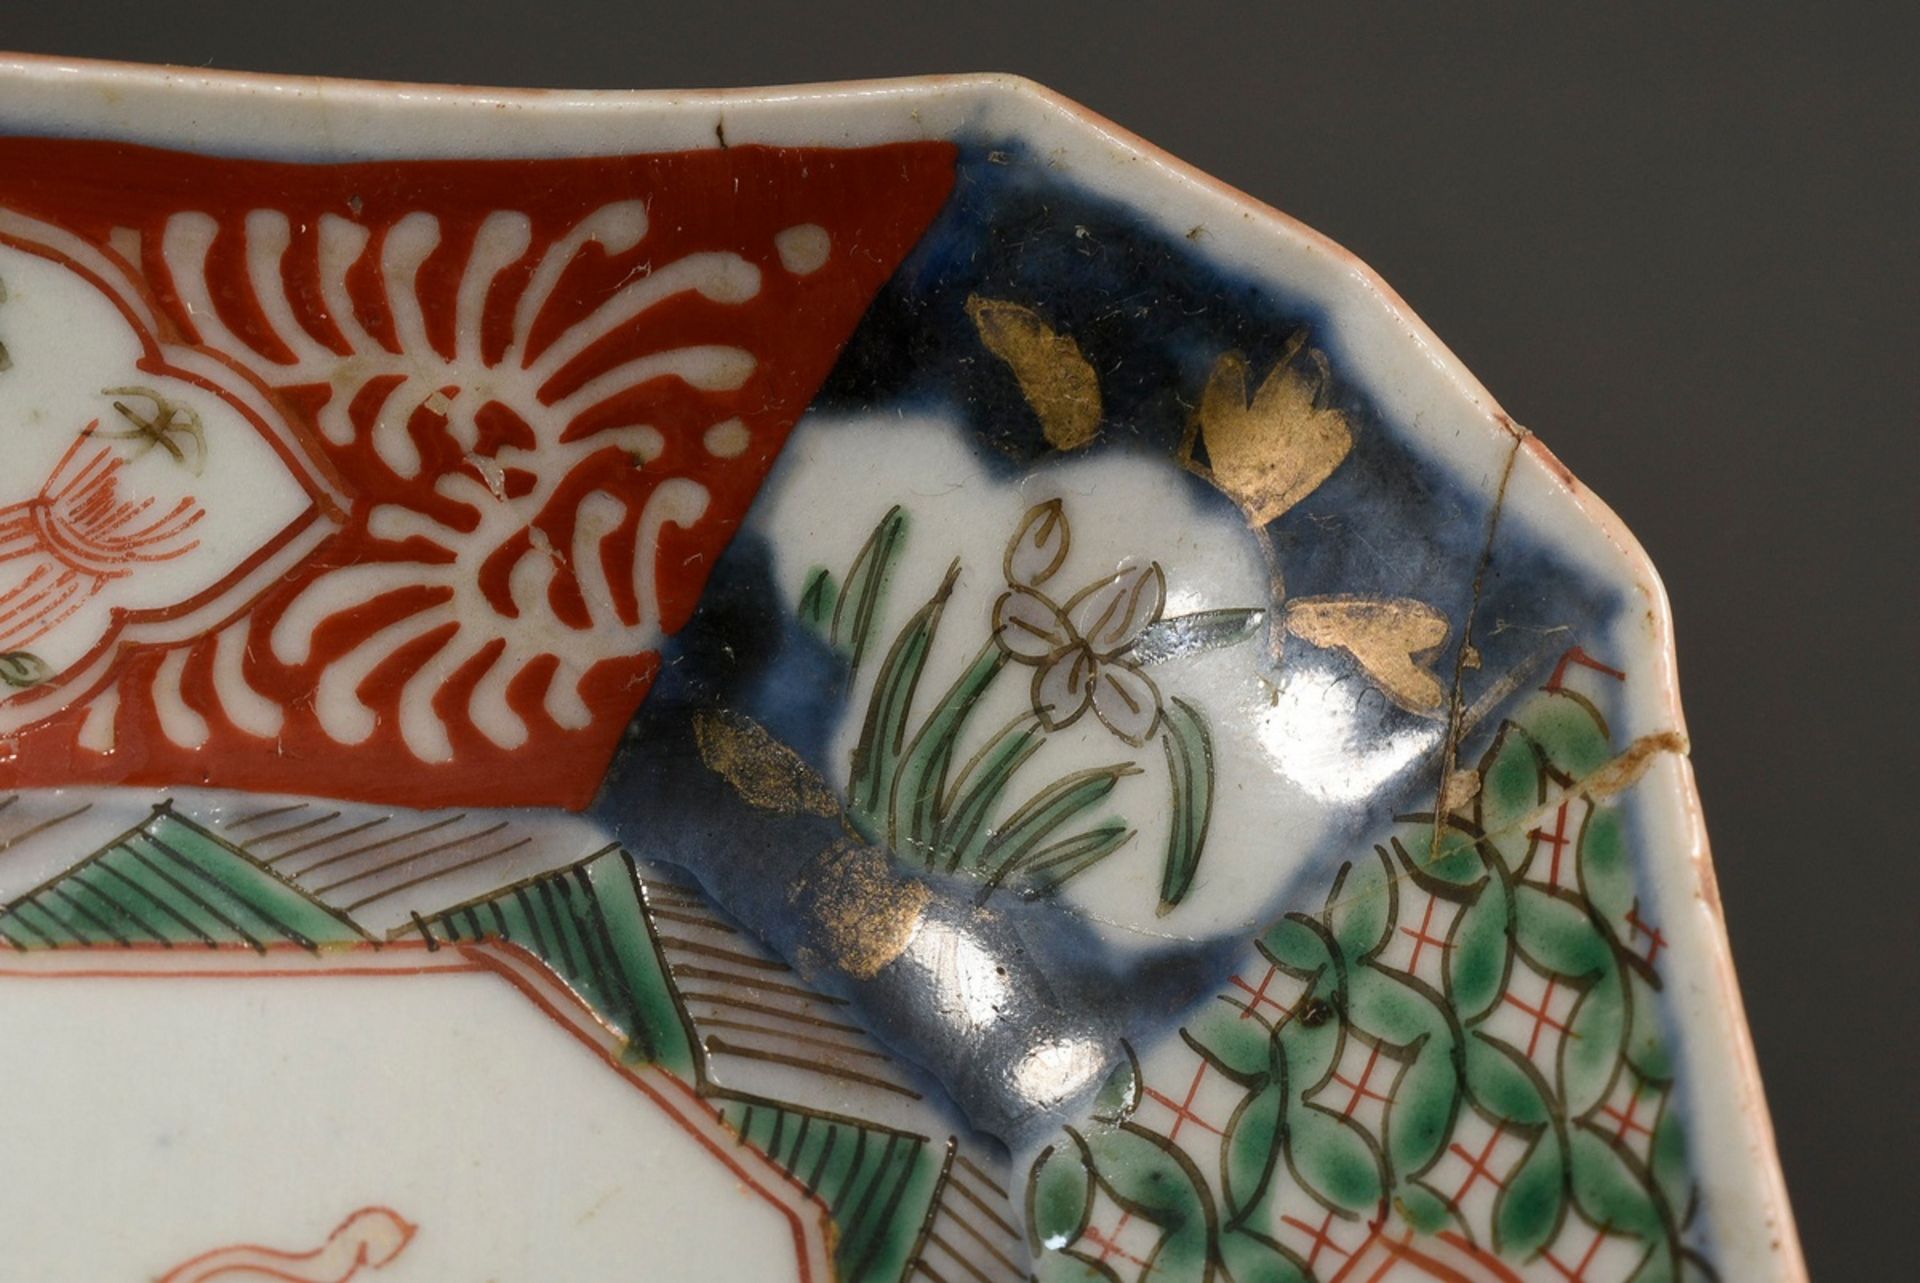 6 Octagonal Imari bowls with polychrome enamel painting "Fo lion and plants", Japan circa 1700, 13x - Image 5 of 5